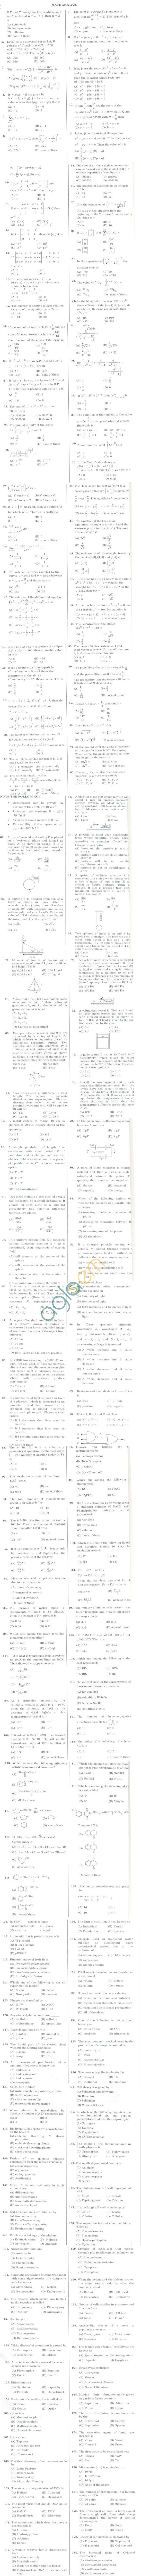 Sathyabama University Entrance Exam 2012 Question Papers